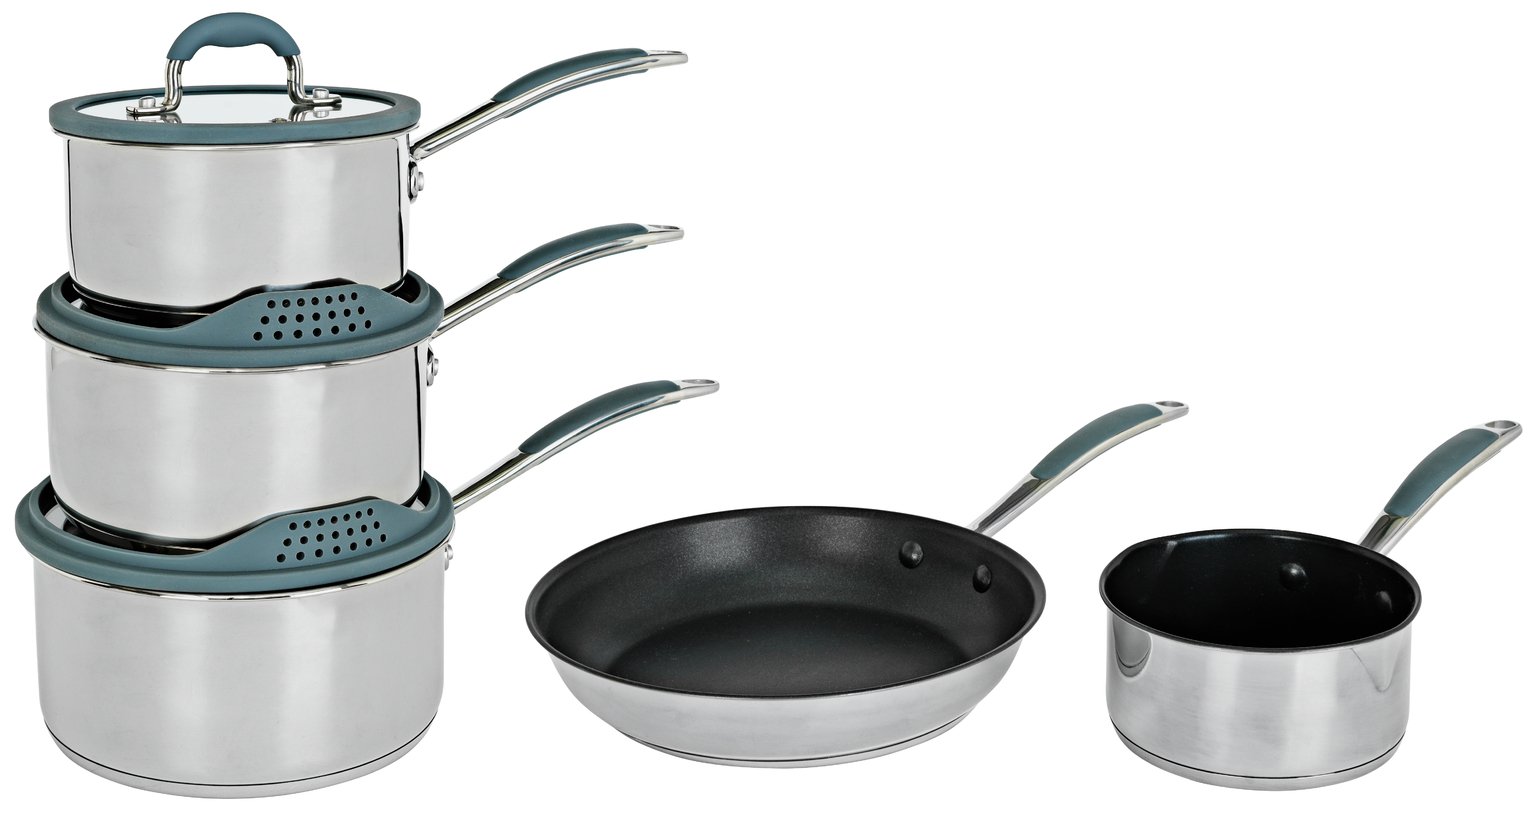 Habitat 5 Piece Stainless Steel with Silicone Rim Pan Set